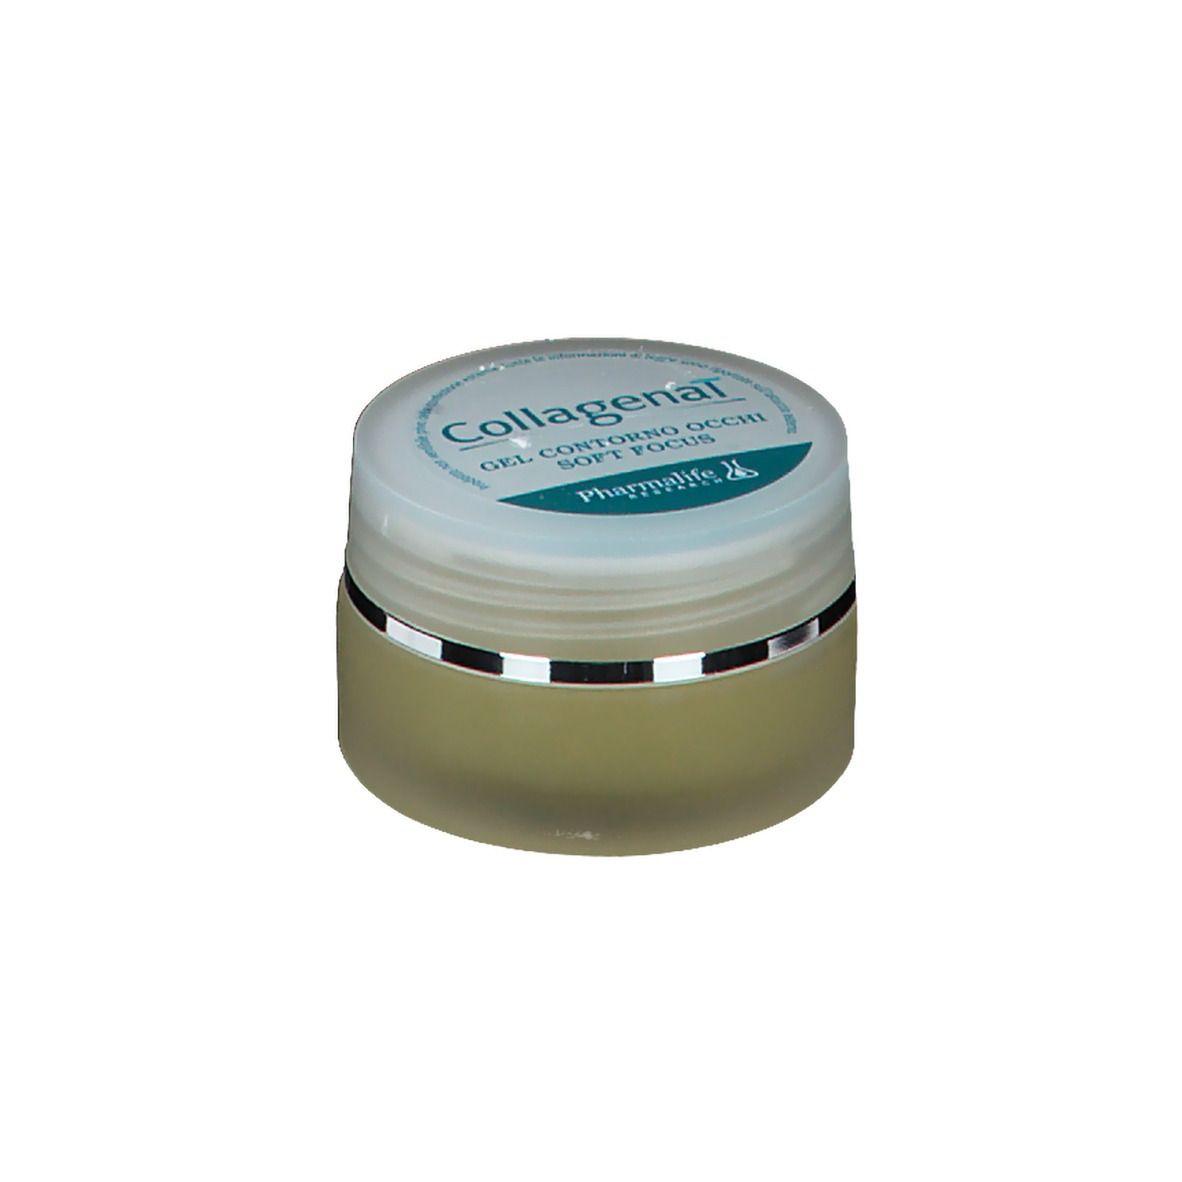 Pharmalife Research  Collagenal Gel Contorno Occhi Soft Focus